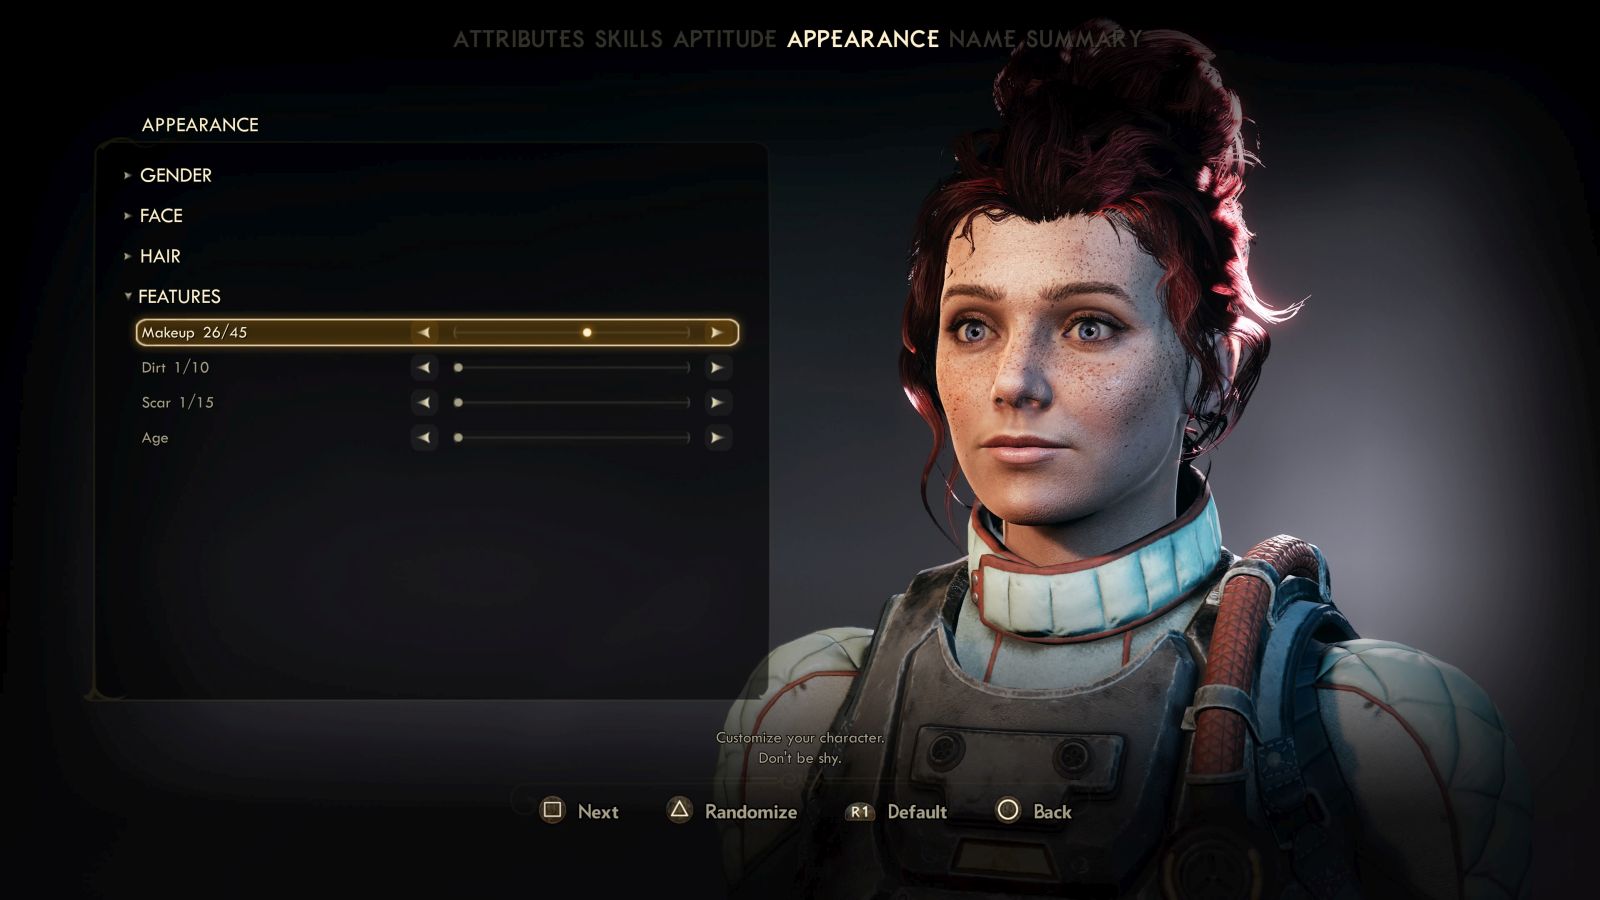 The Outer Worlds: Spacer's Choice Edition Review - RPGamer